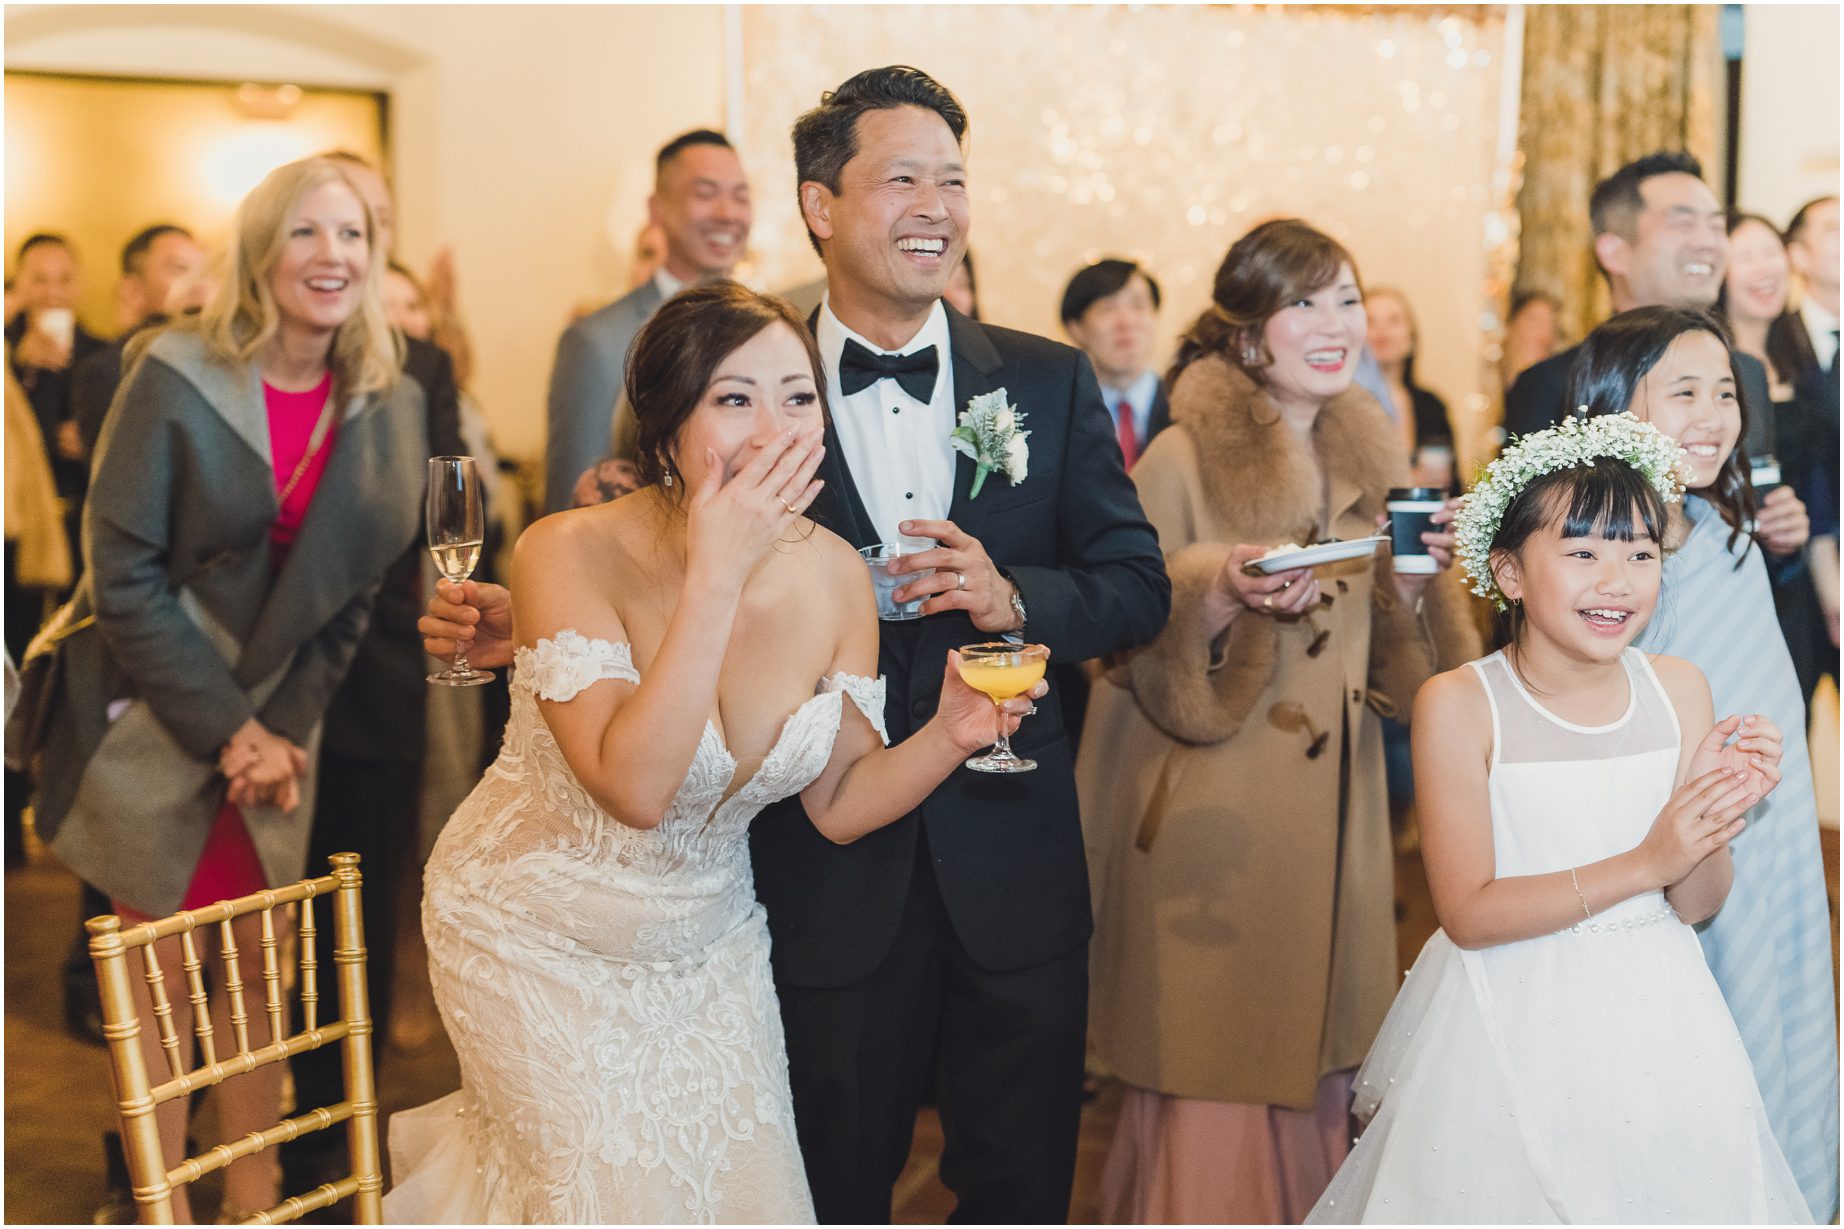 A bride leans and covers her mouth in amusement while the groom smiles next to her and other people observe the same thing